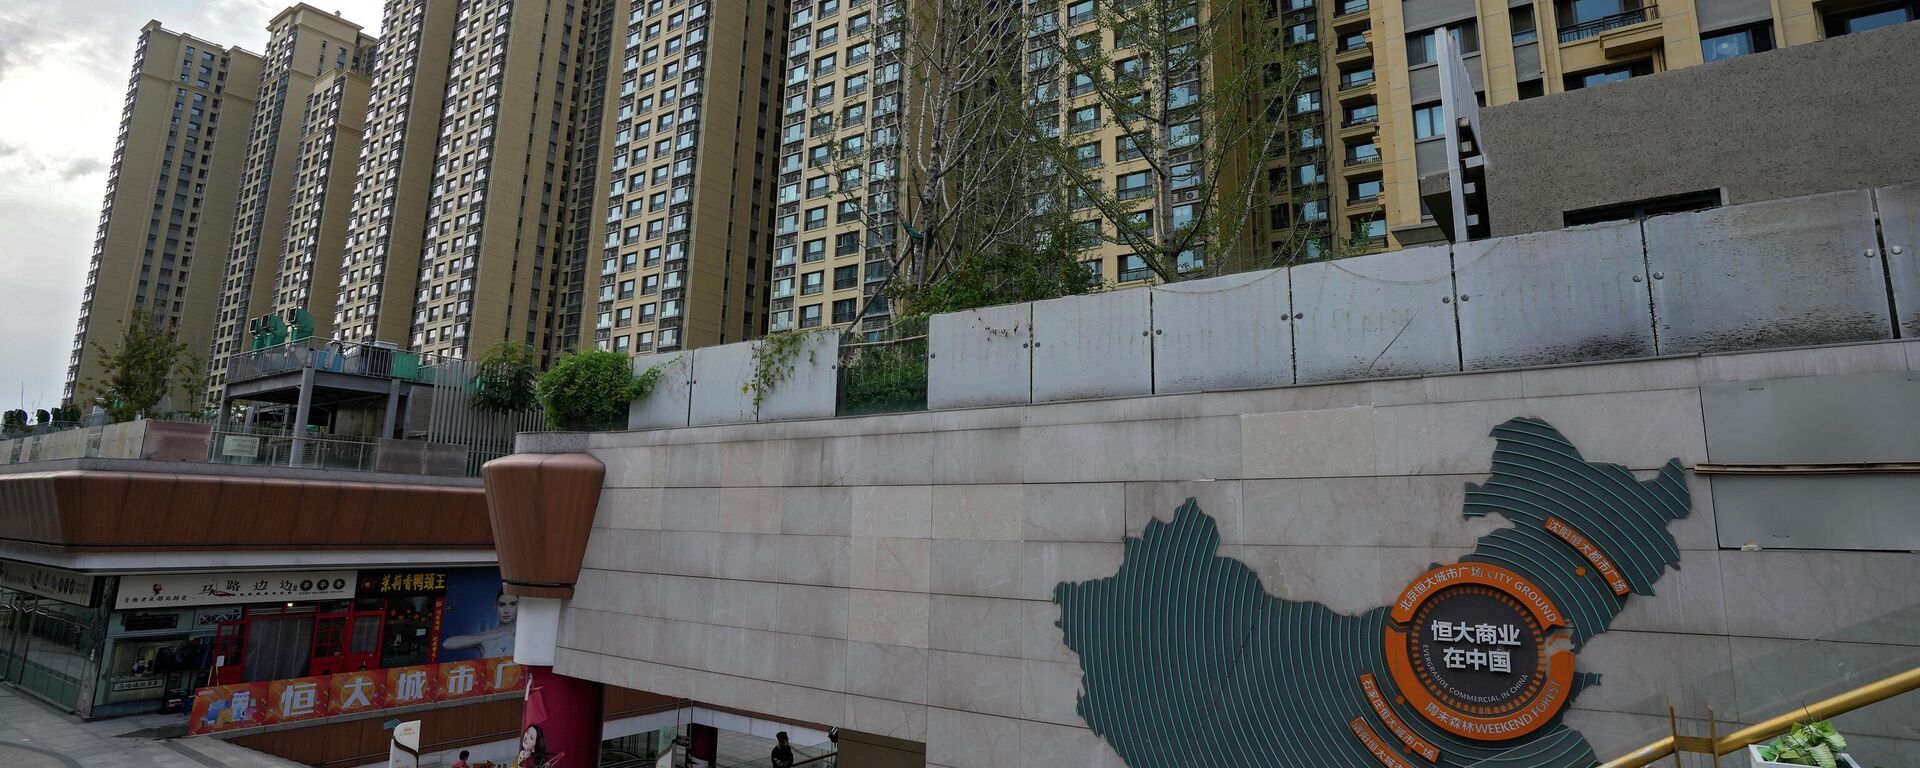 A man walks by a China's map showing Evergrande development projects and its apartment buildings are seen behind, at an Evergrande city plaza in Beijing. File photo. - Sputnik International, 1920, 29.01.2024